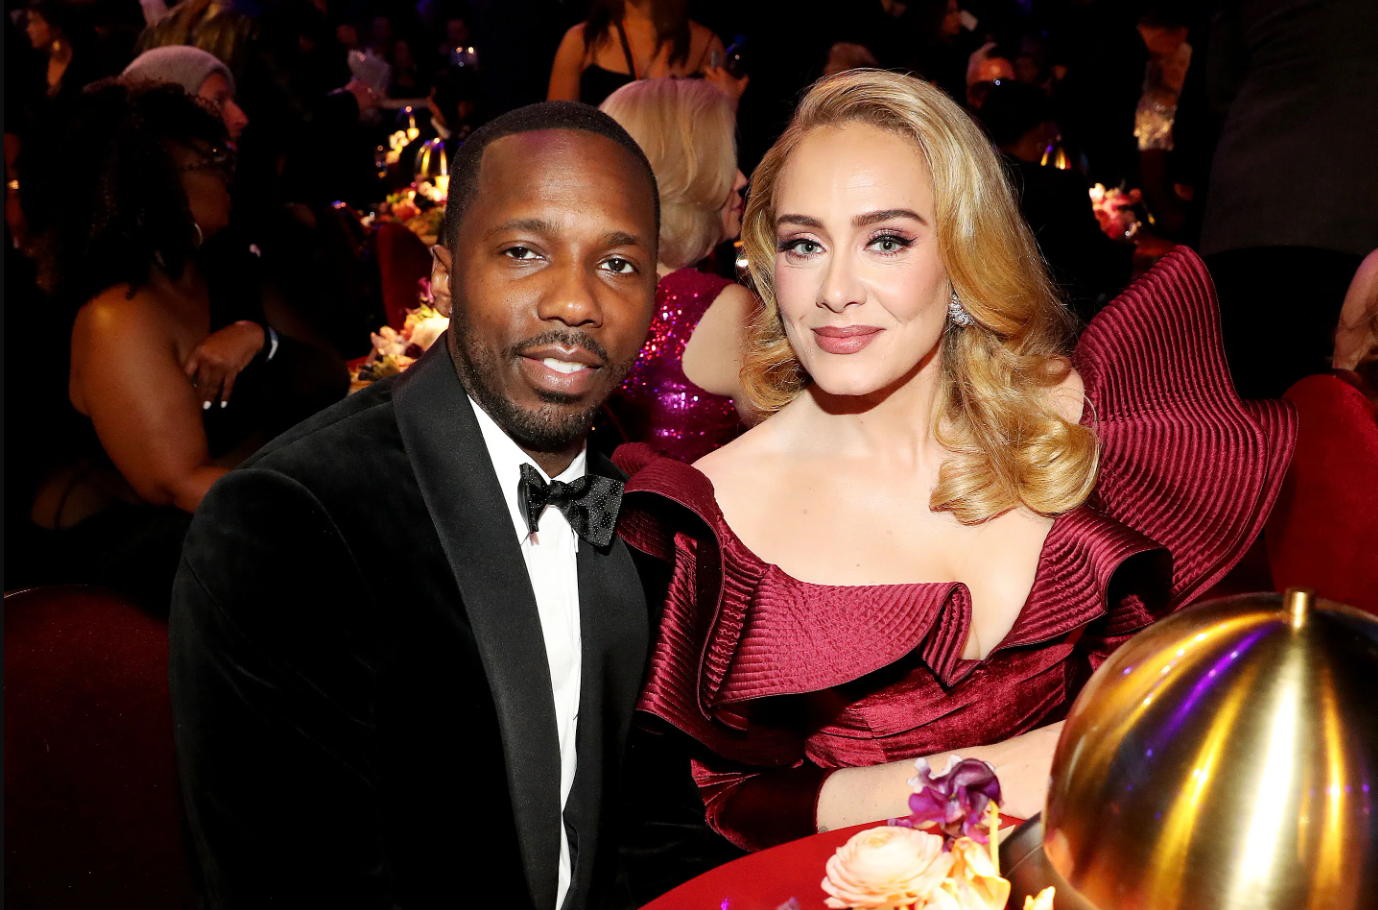 Adele Husband: Who is Rich Paul and how did they fall in love? Find out everything you need to know about the singer’s new husband.